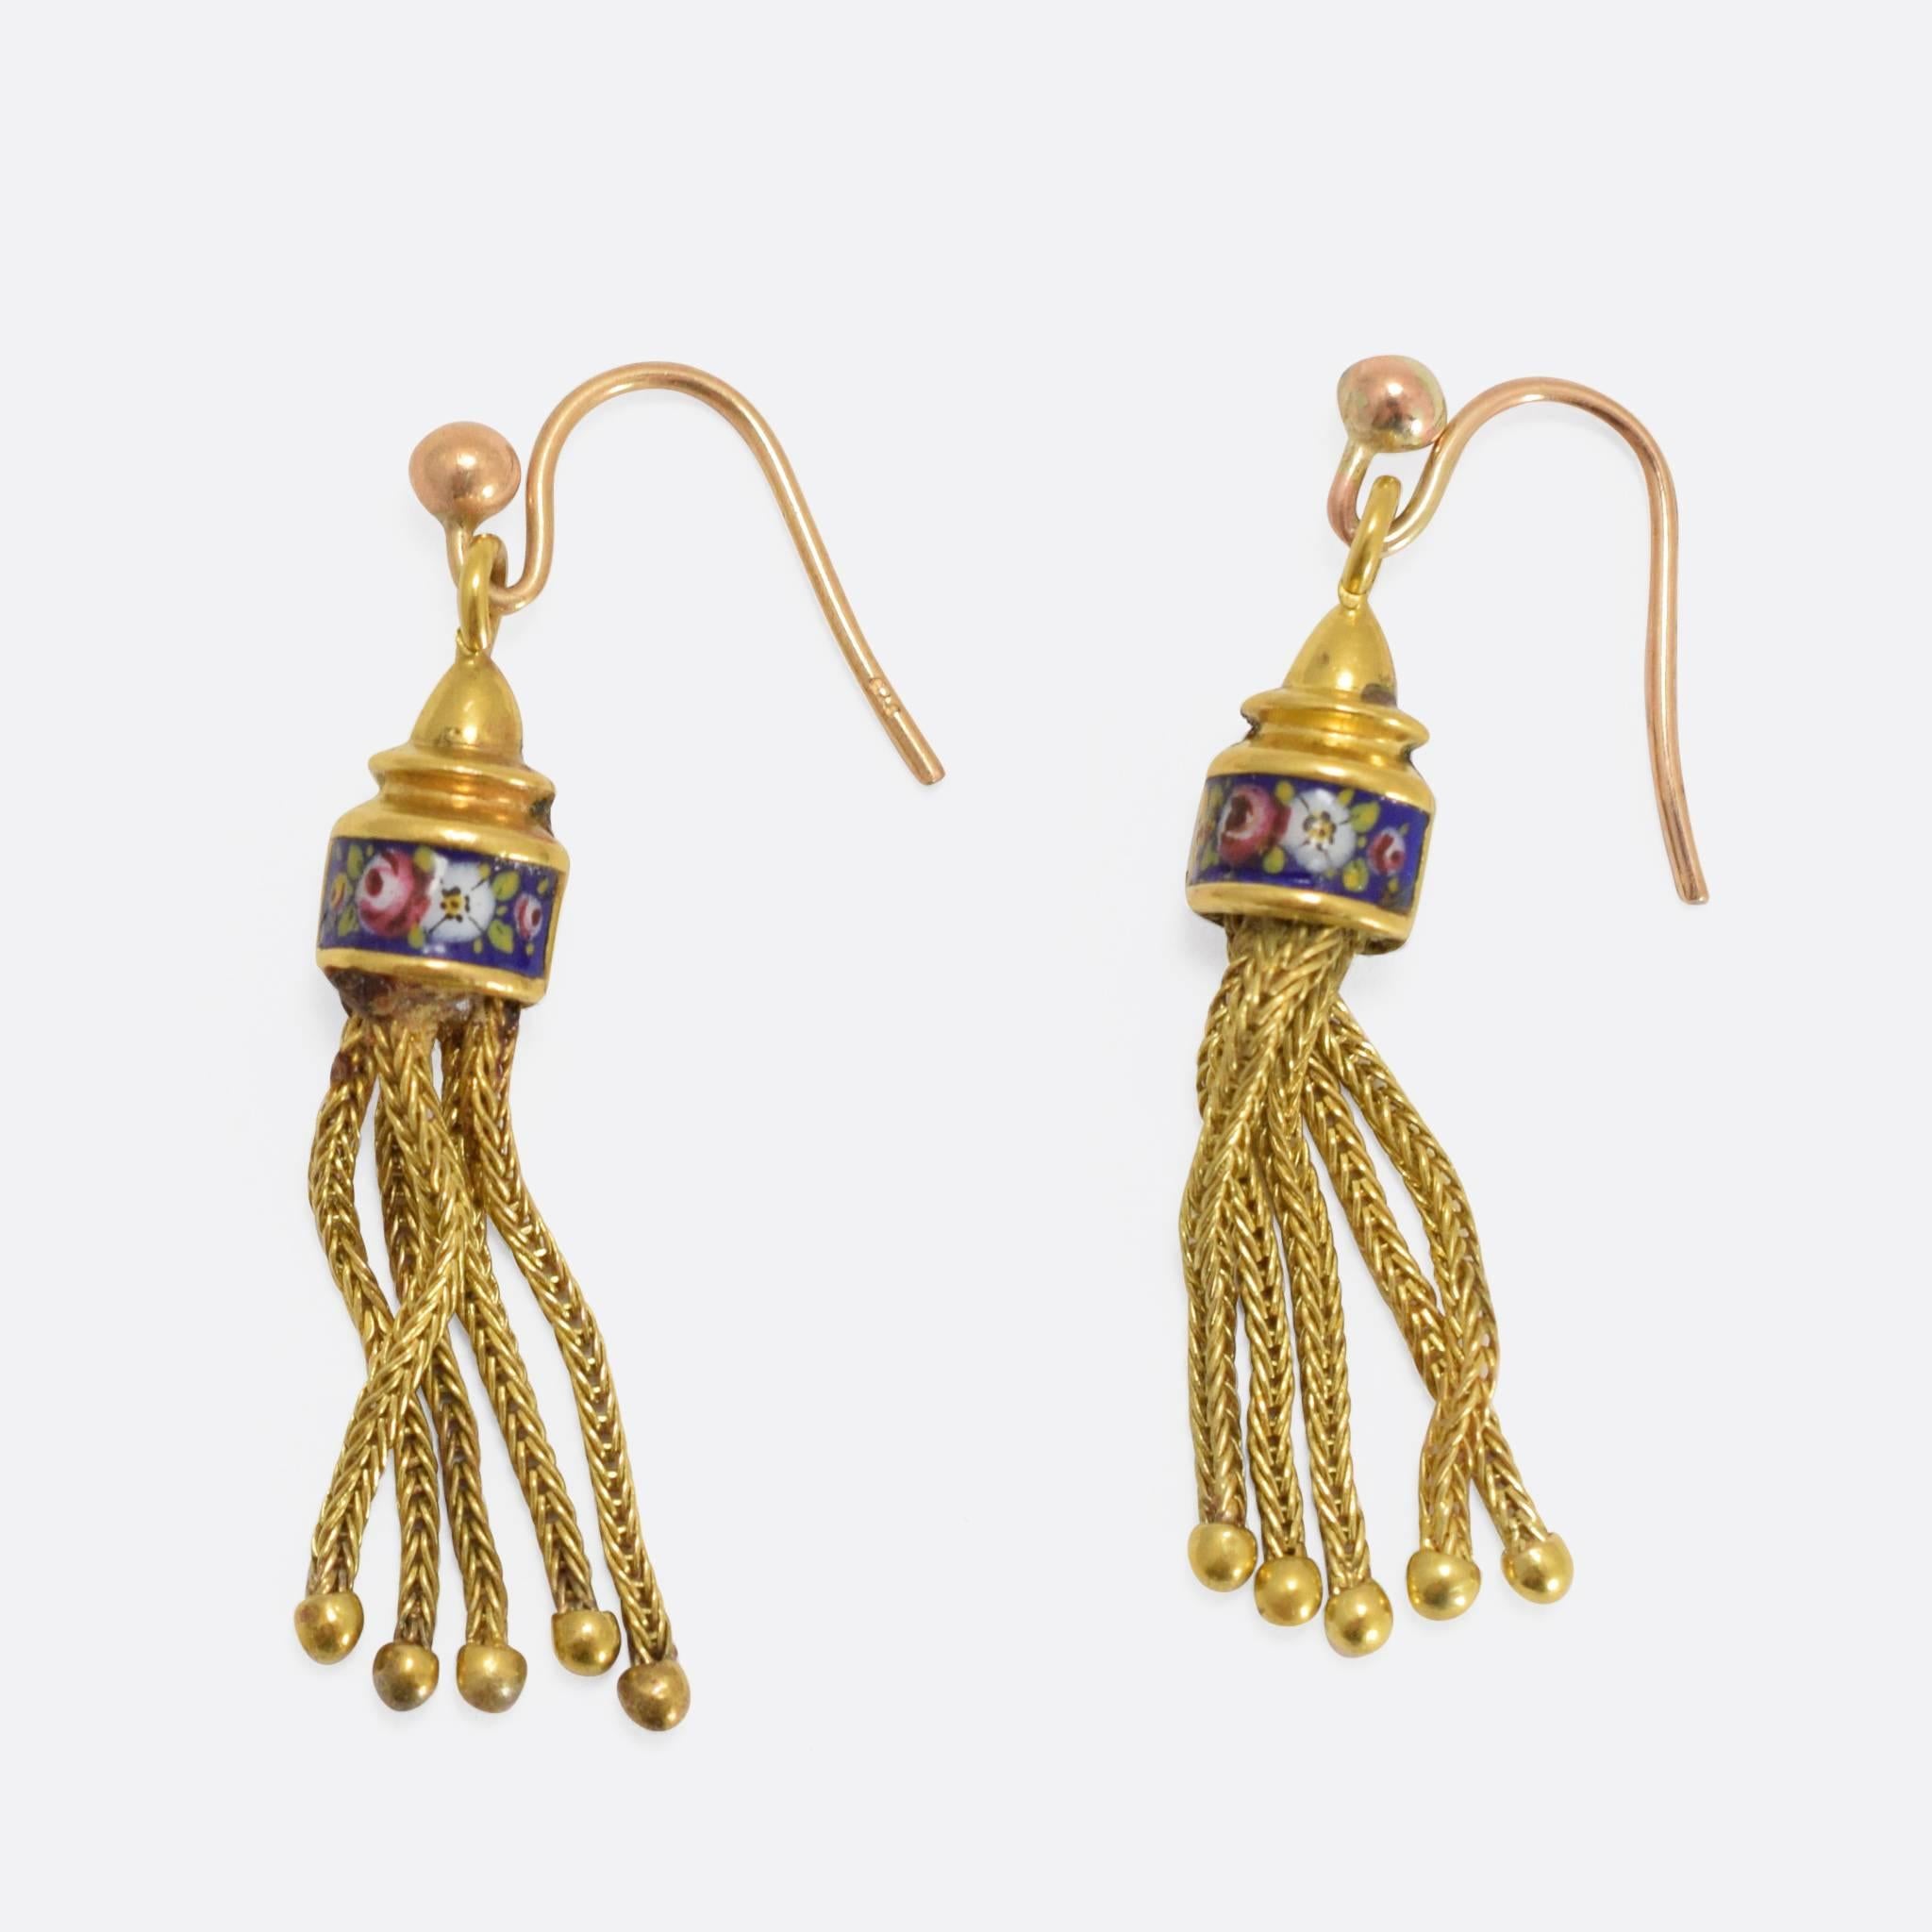 This beautiful pair of tassel earrings is modelled in 15ct yellow gold. The heads are adorned with a band of enamel, featuring cute floral designs. The tops are likely later additions.